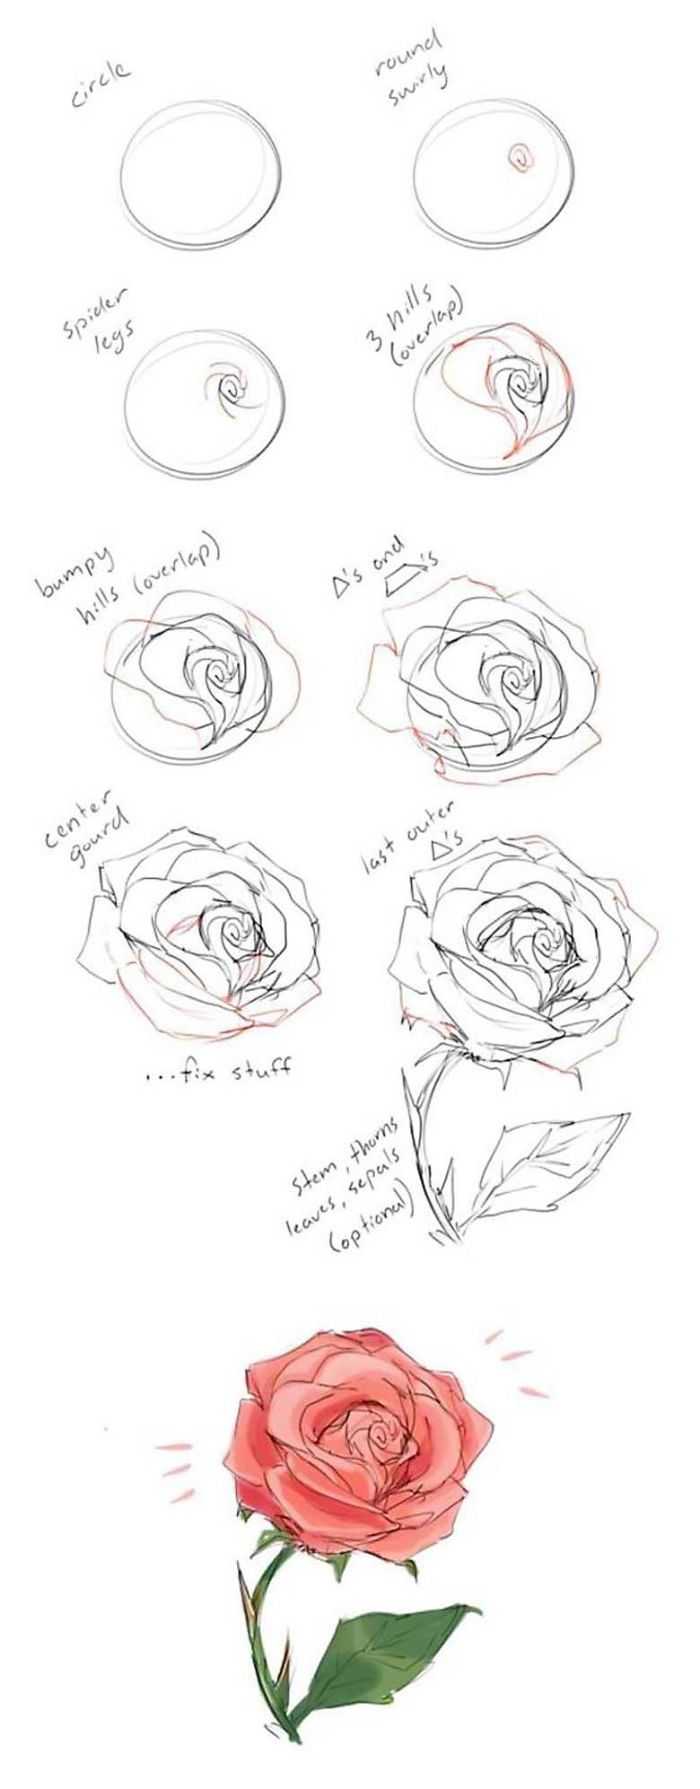 eight step diy tutorial how to draw a flower step by step pink rose with green leaf and stem